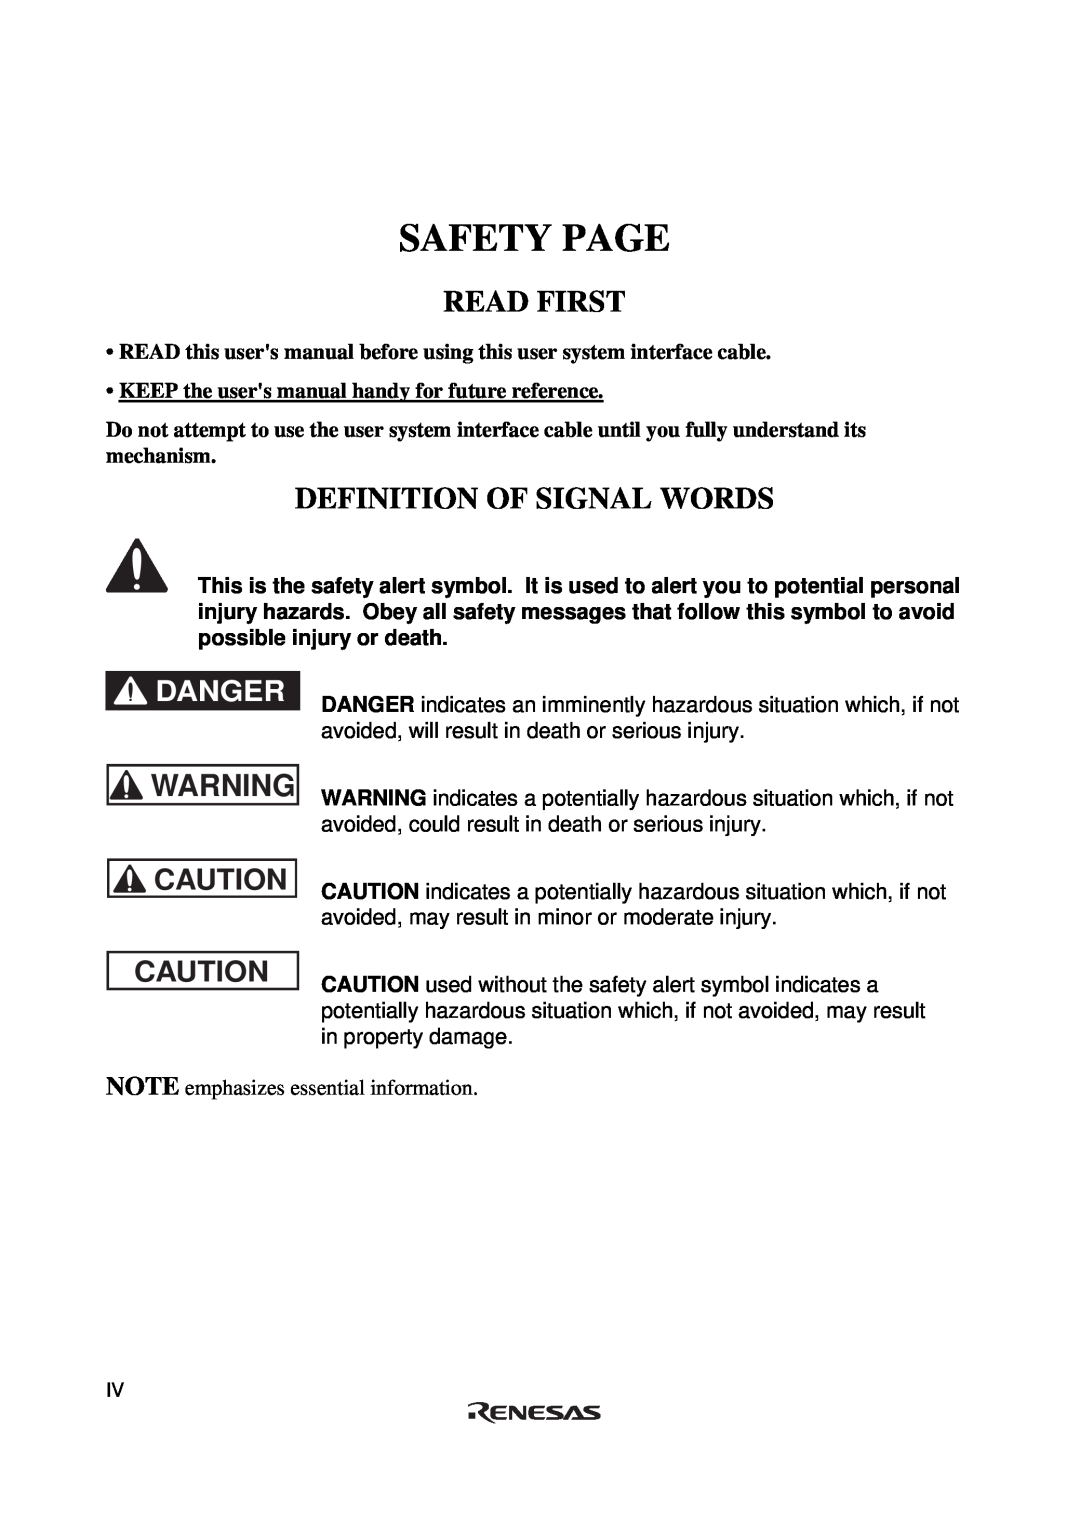 Renesas H8S/2615 Series user manual Safety Page, Definition Of Signal Words, Read First, Danger 